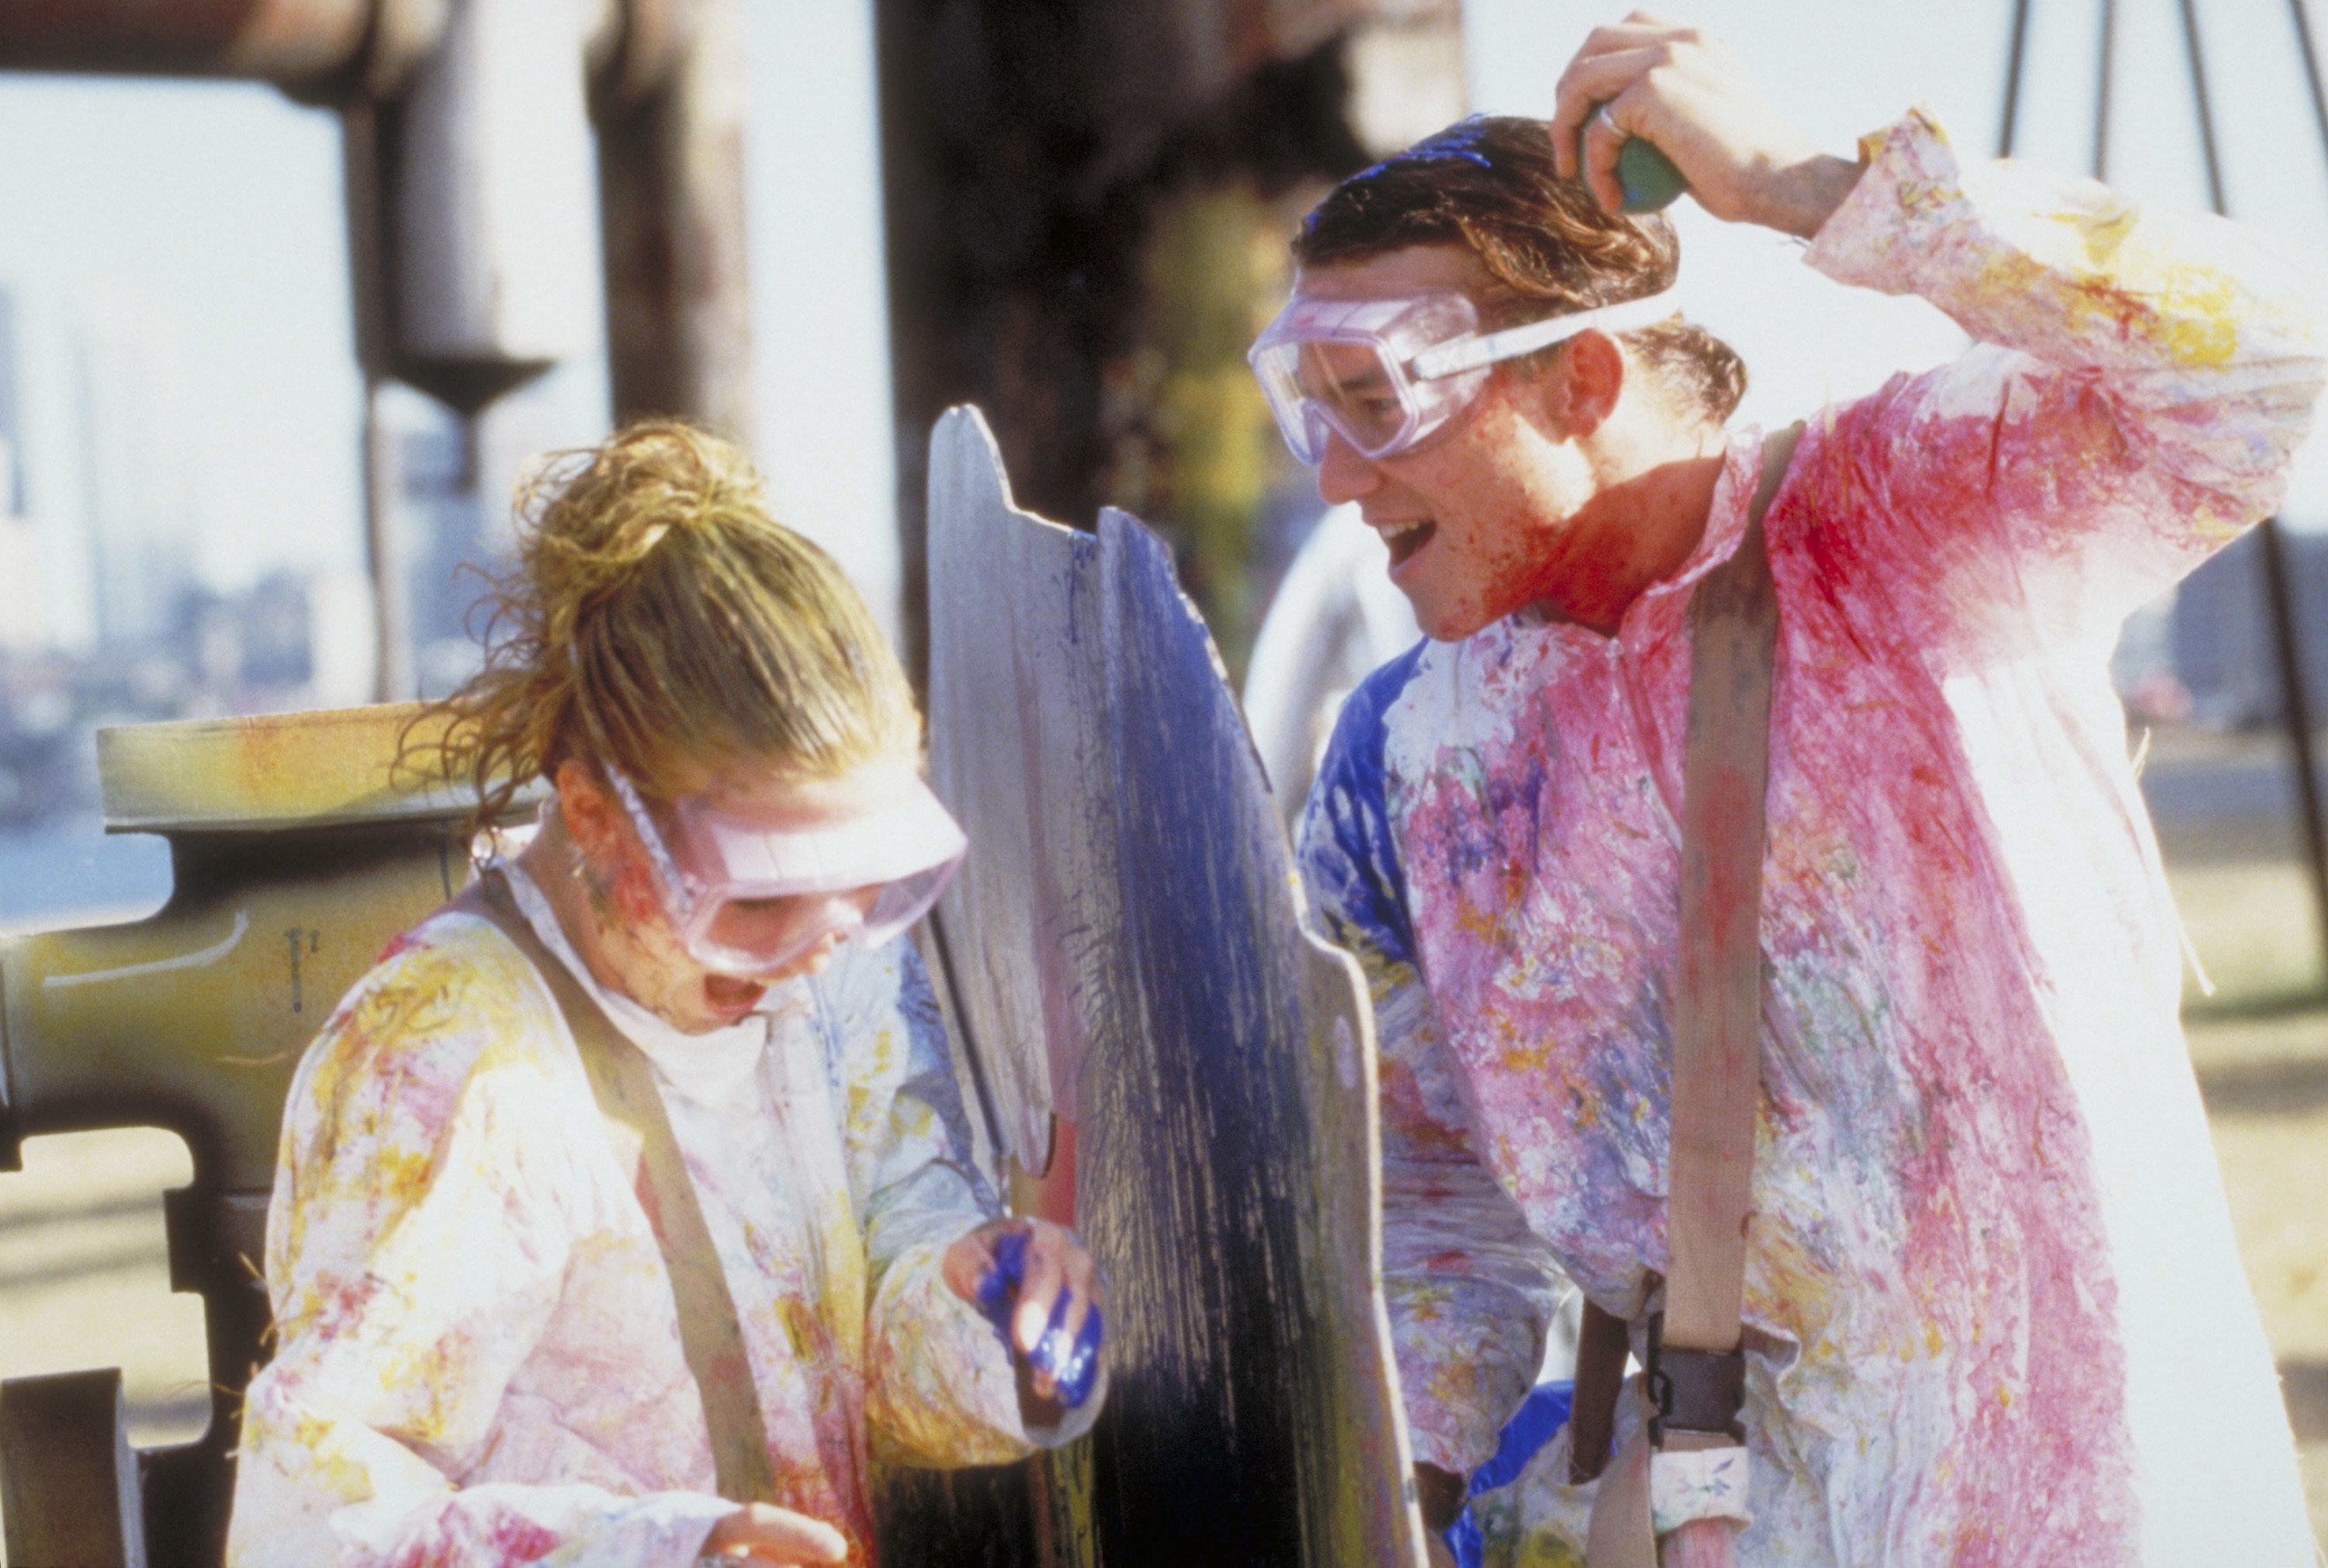 Julia and Heath in the movie painting and wearing goggles